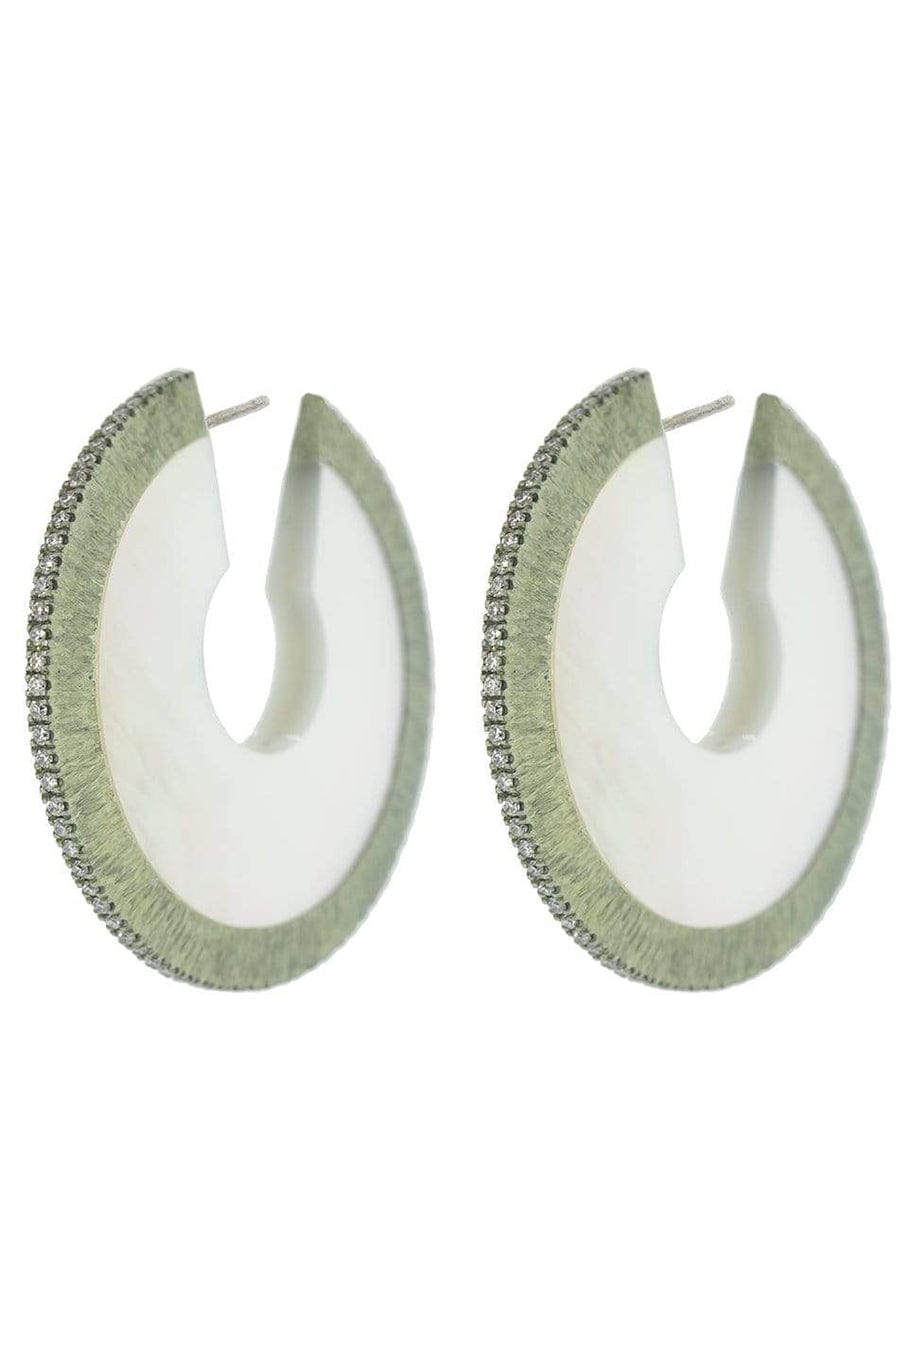 ARUNASHI-Small Mother of Pearl Circular Earrings-WHITE GOLD